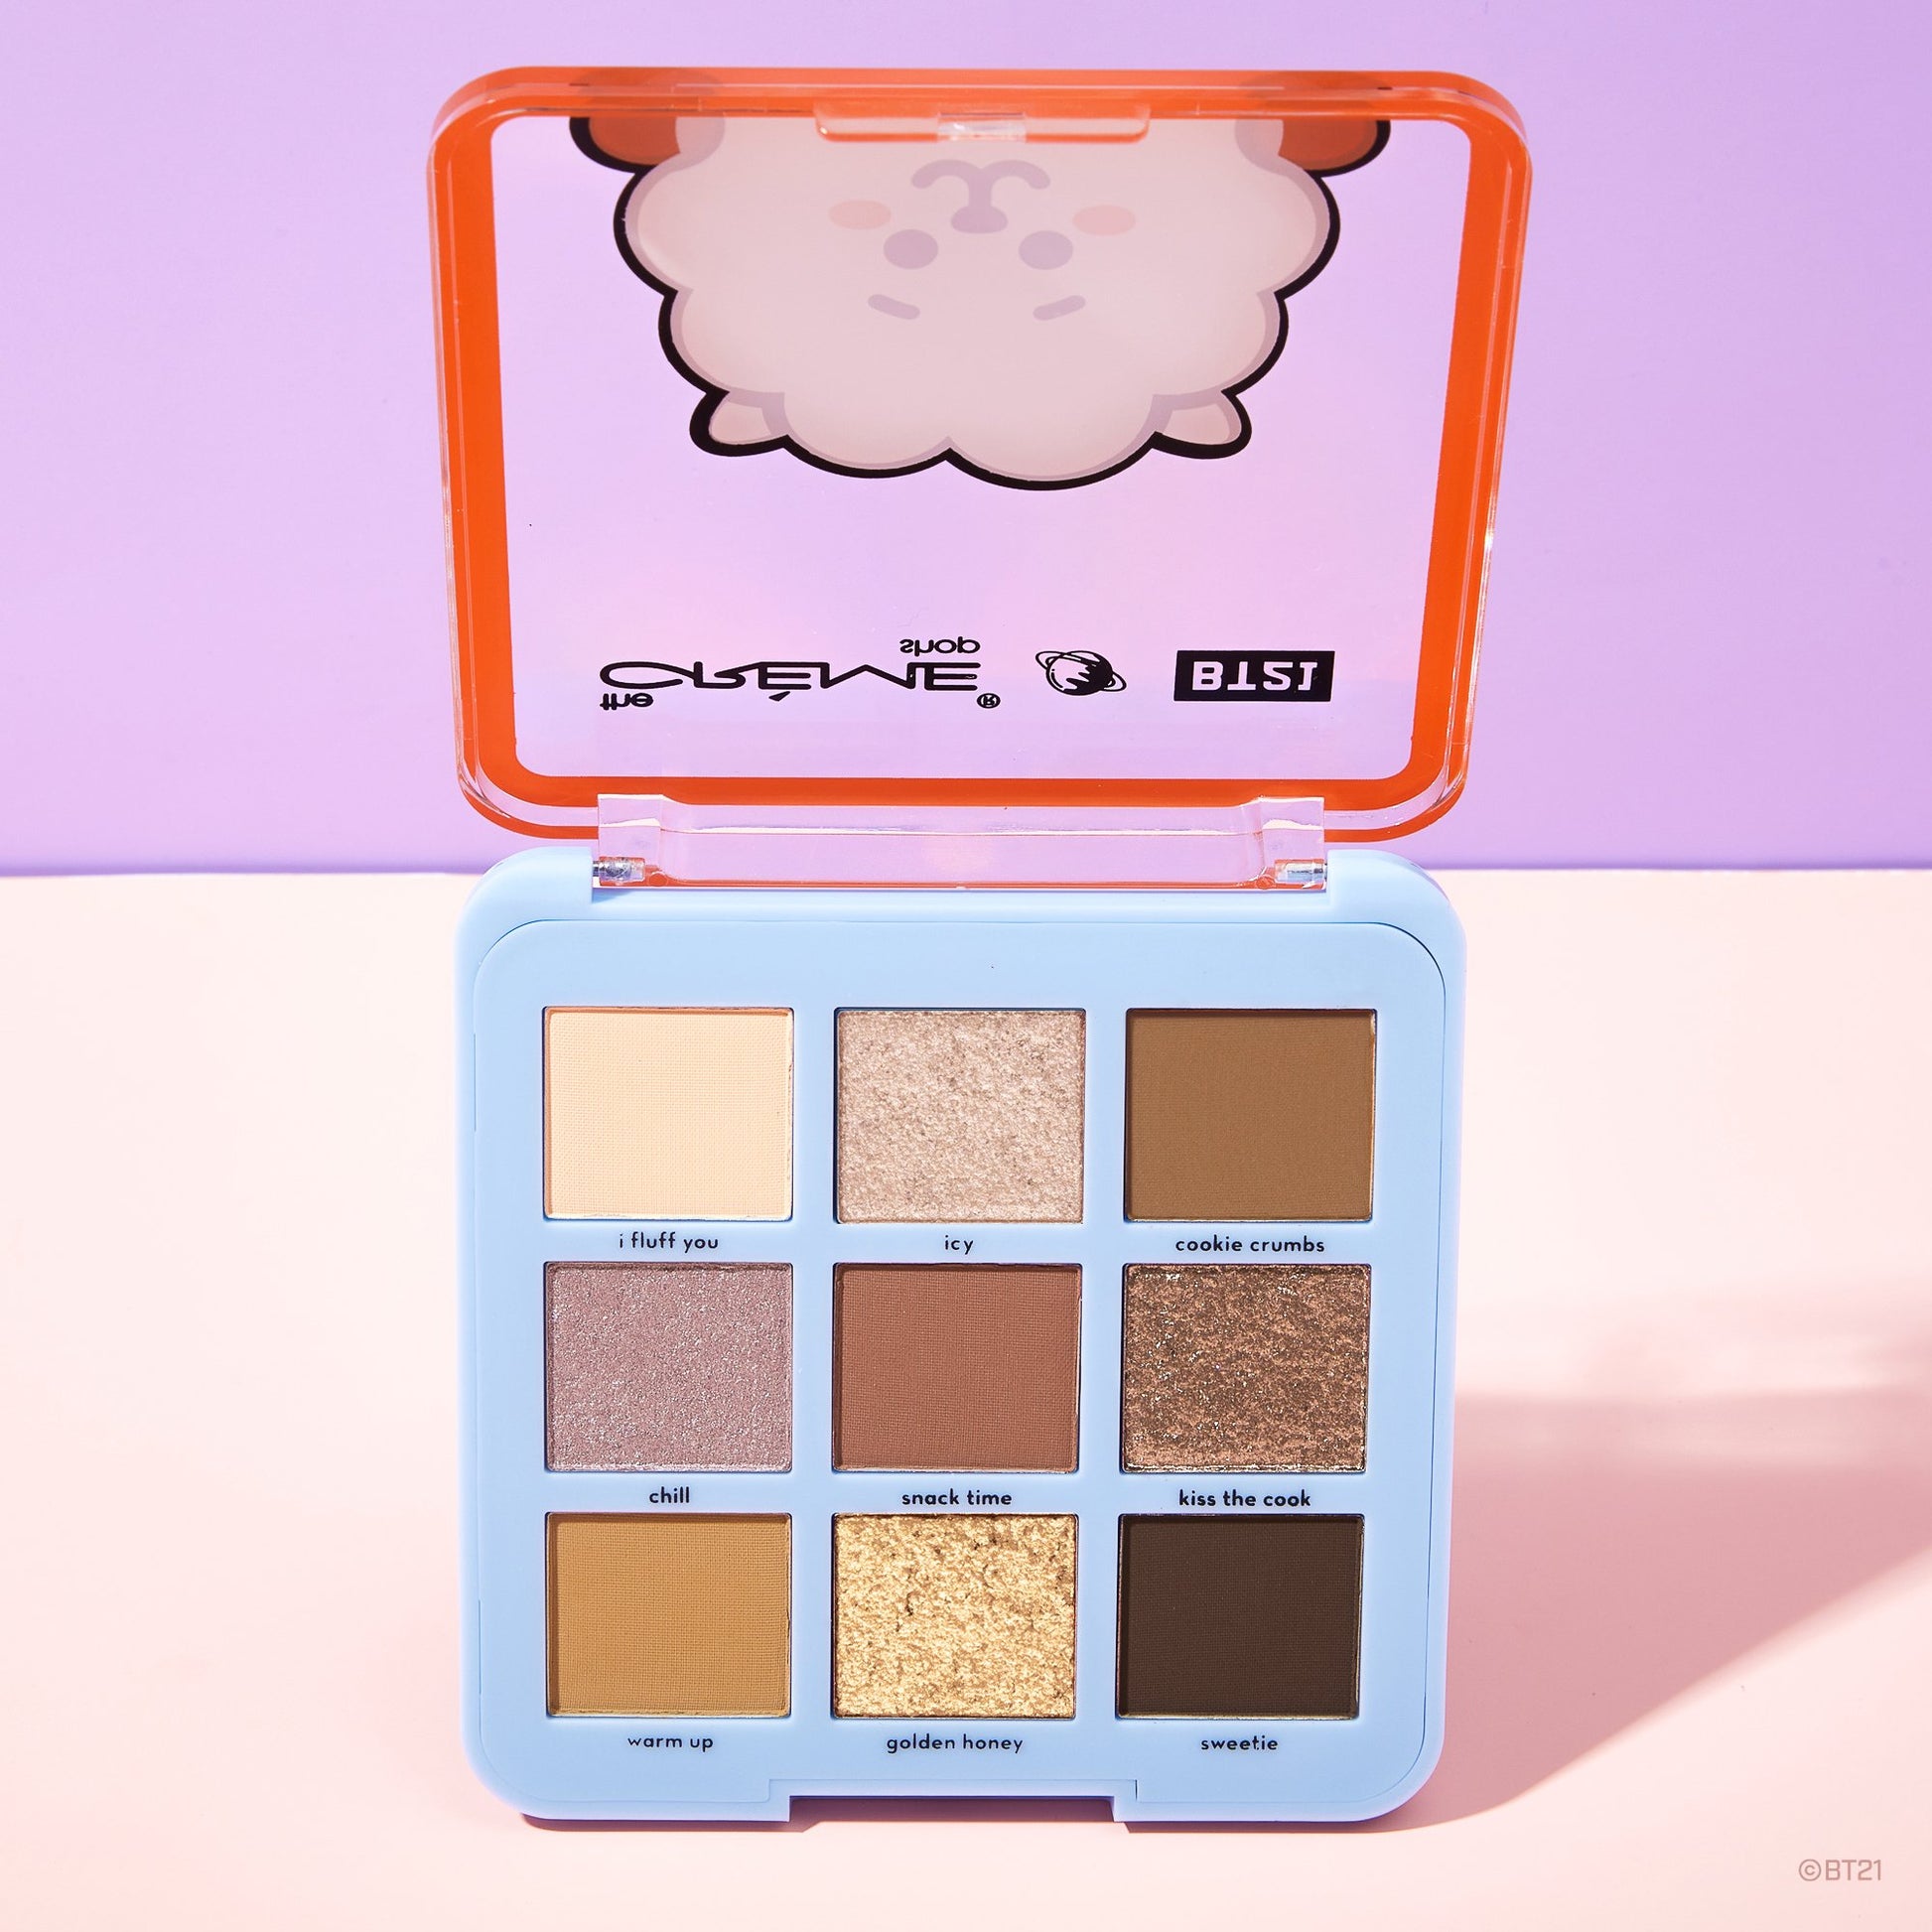 The Crème Shop | BT21: THE RIGHT FLUFF Eyeshadow Palette - RJ Eyeshadow Palette The Crème Shop x BT21 